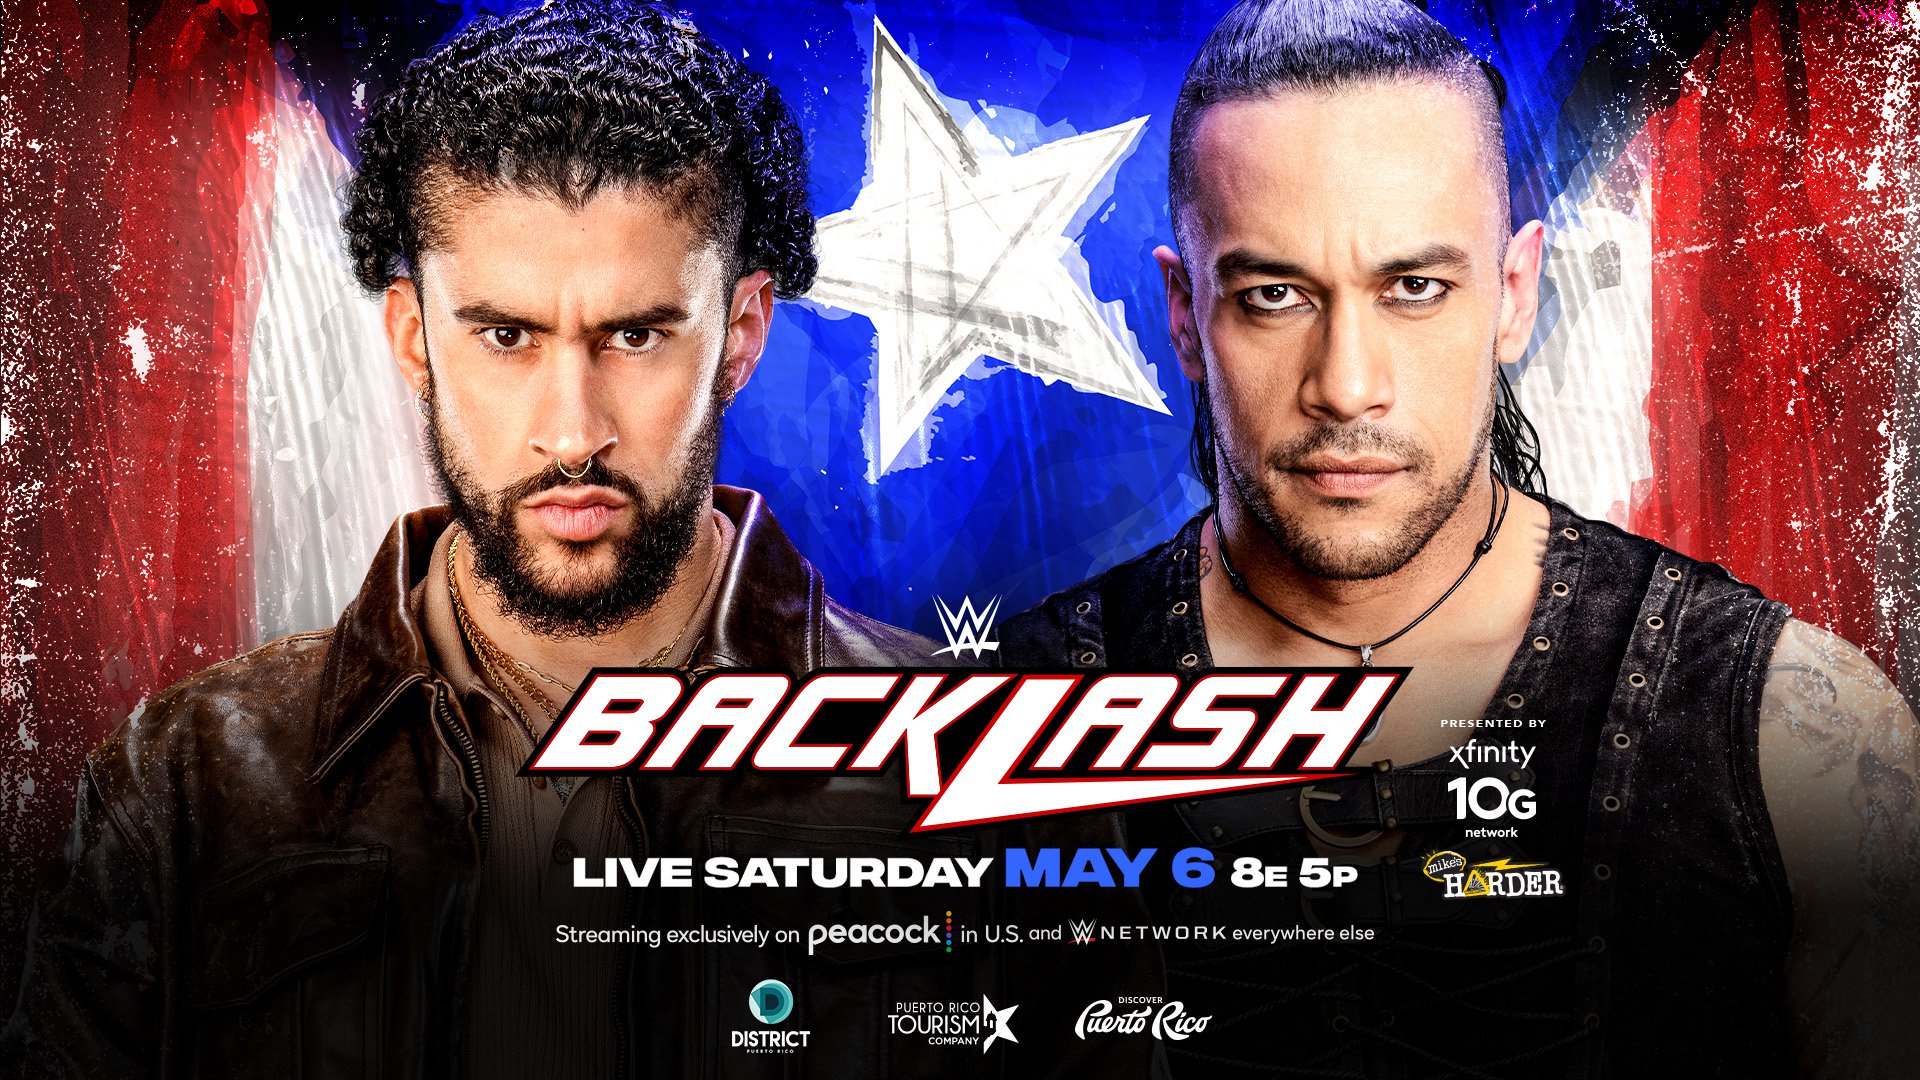 WWE Backlash Match Card, How to Watch, Previews, Start Time and More